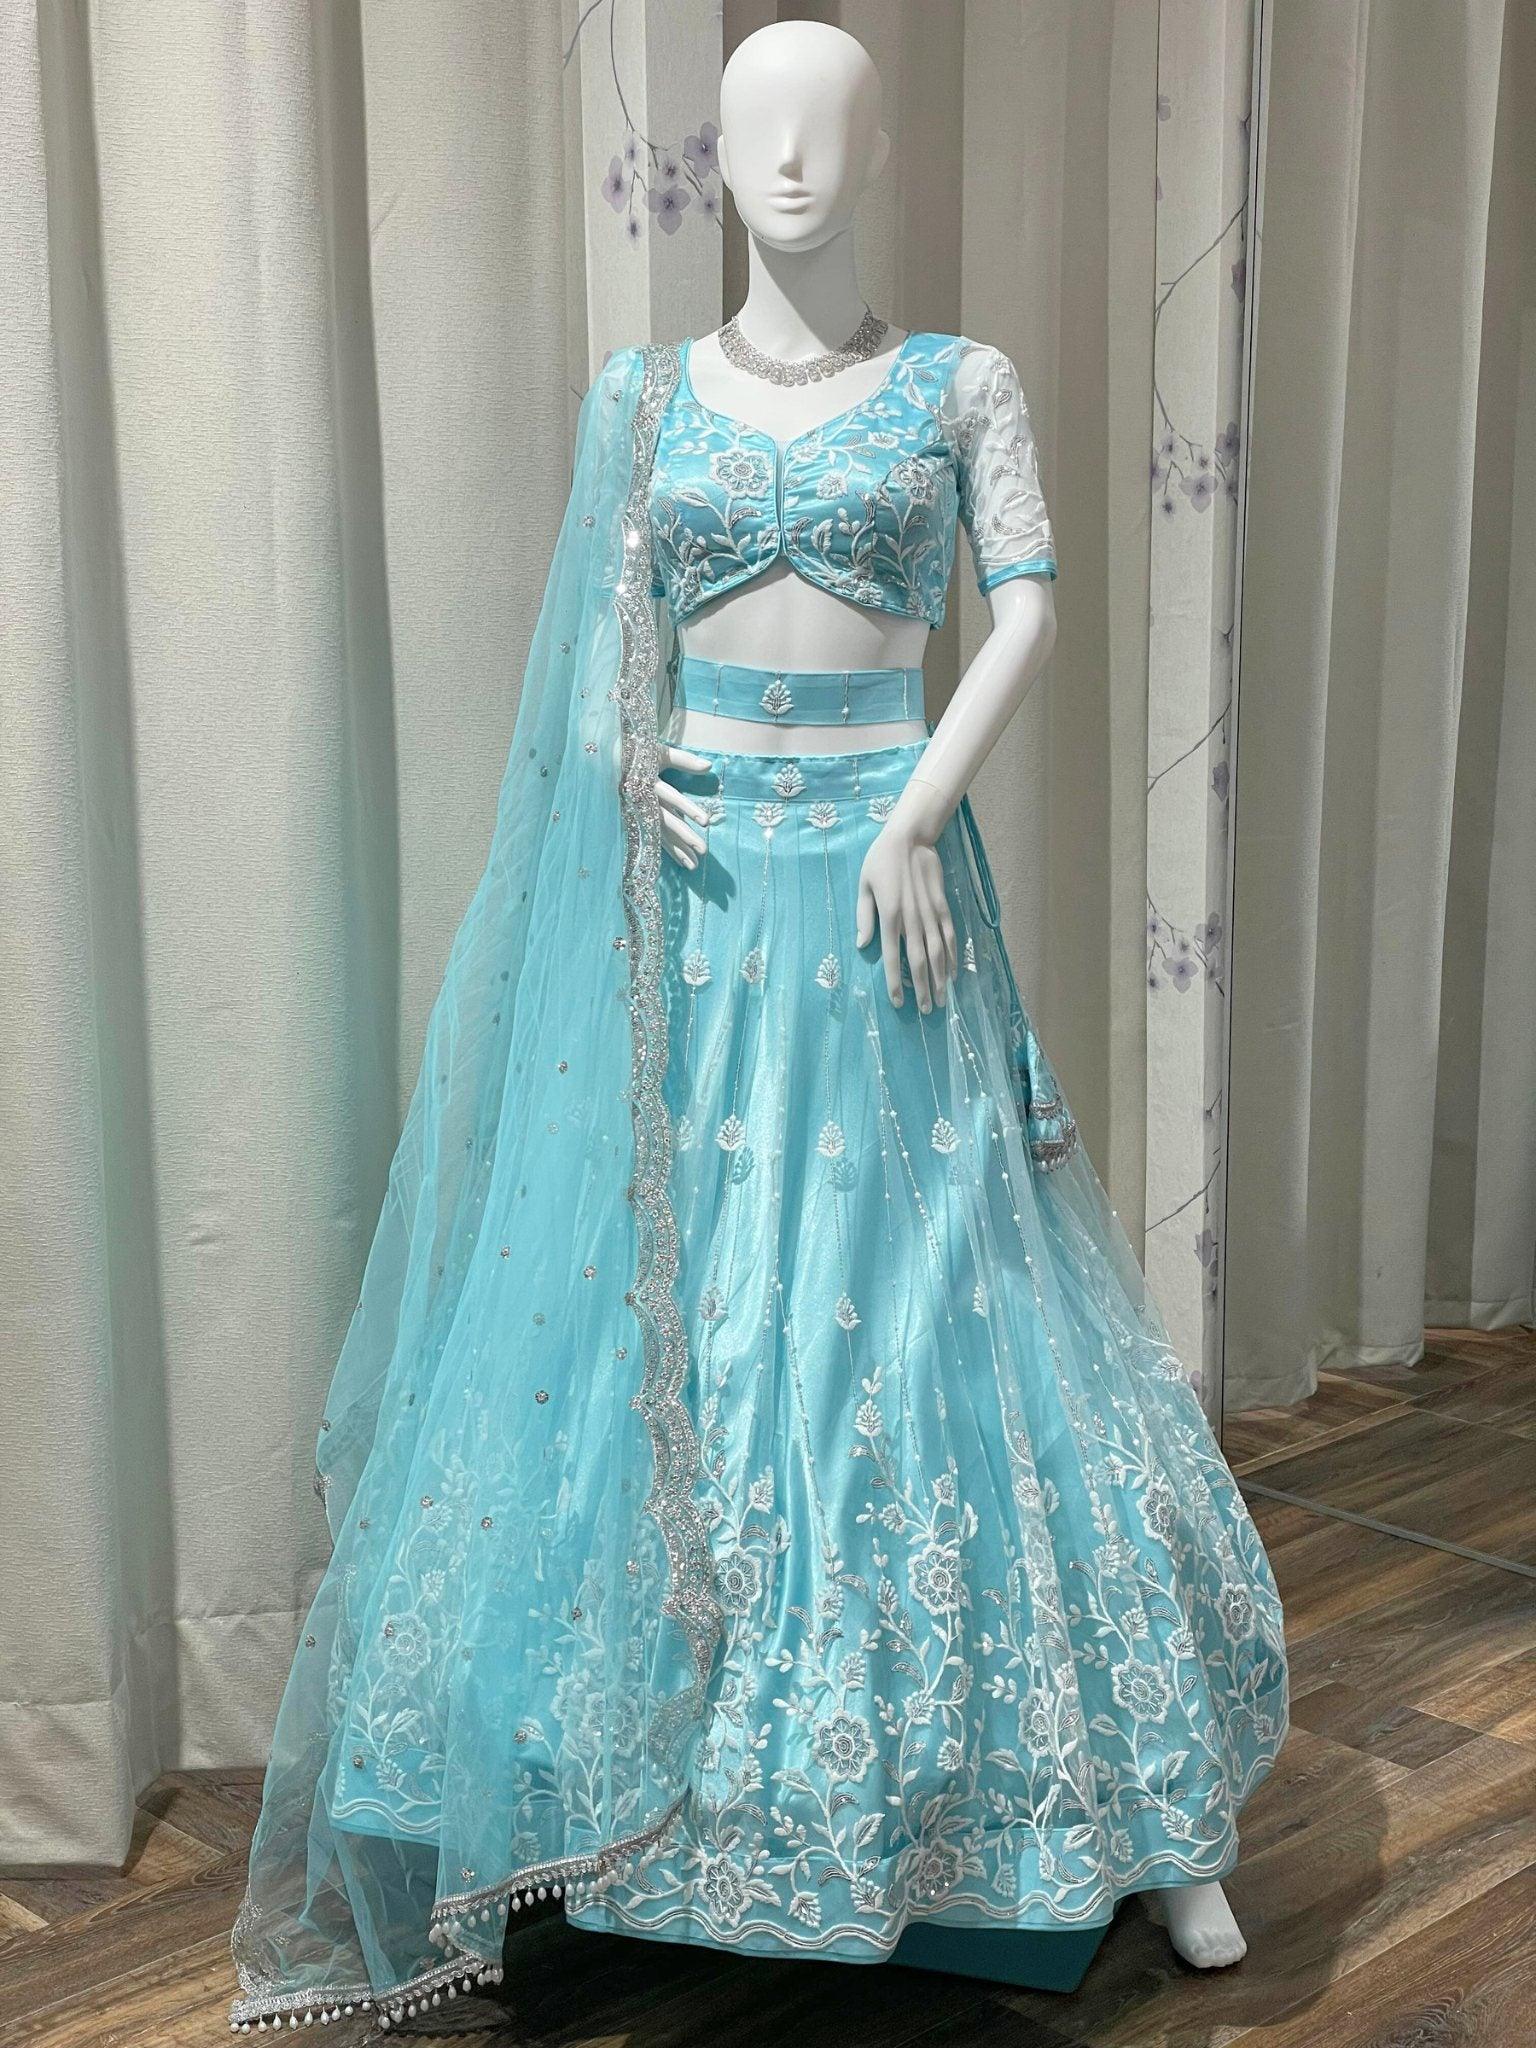 Which is the best store to buy lehengas in Pune? - Quora